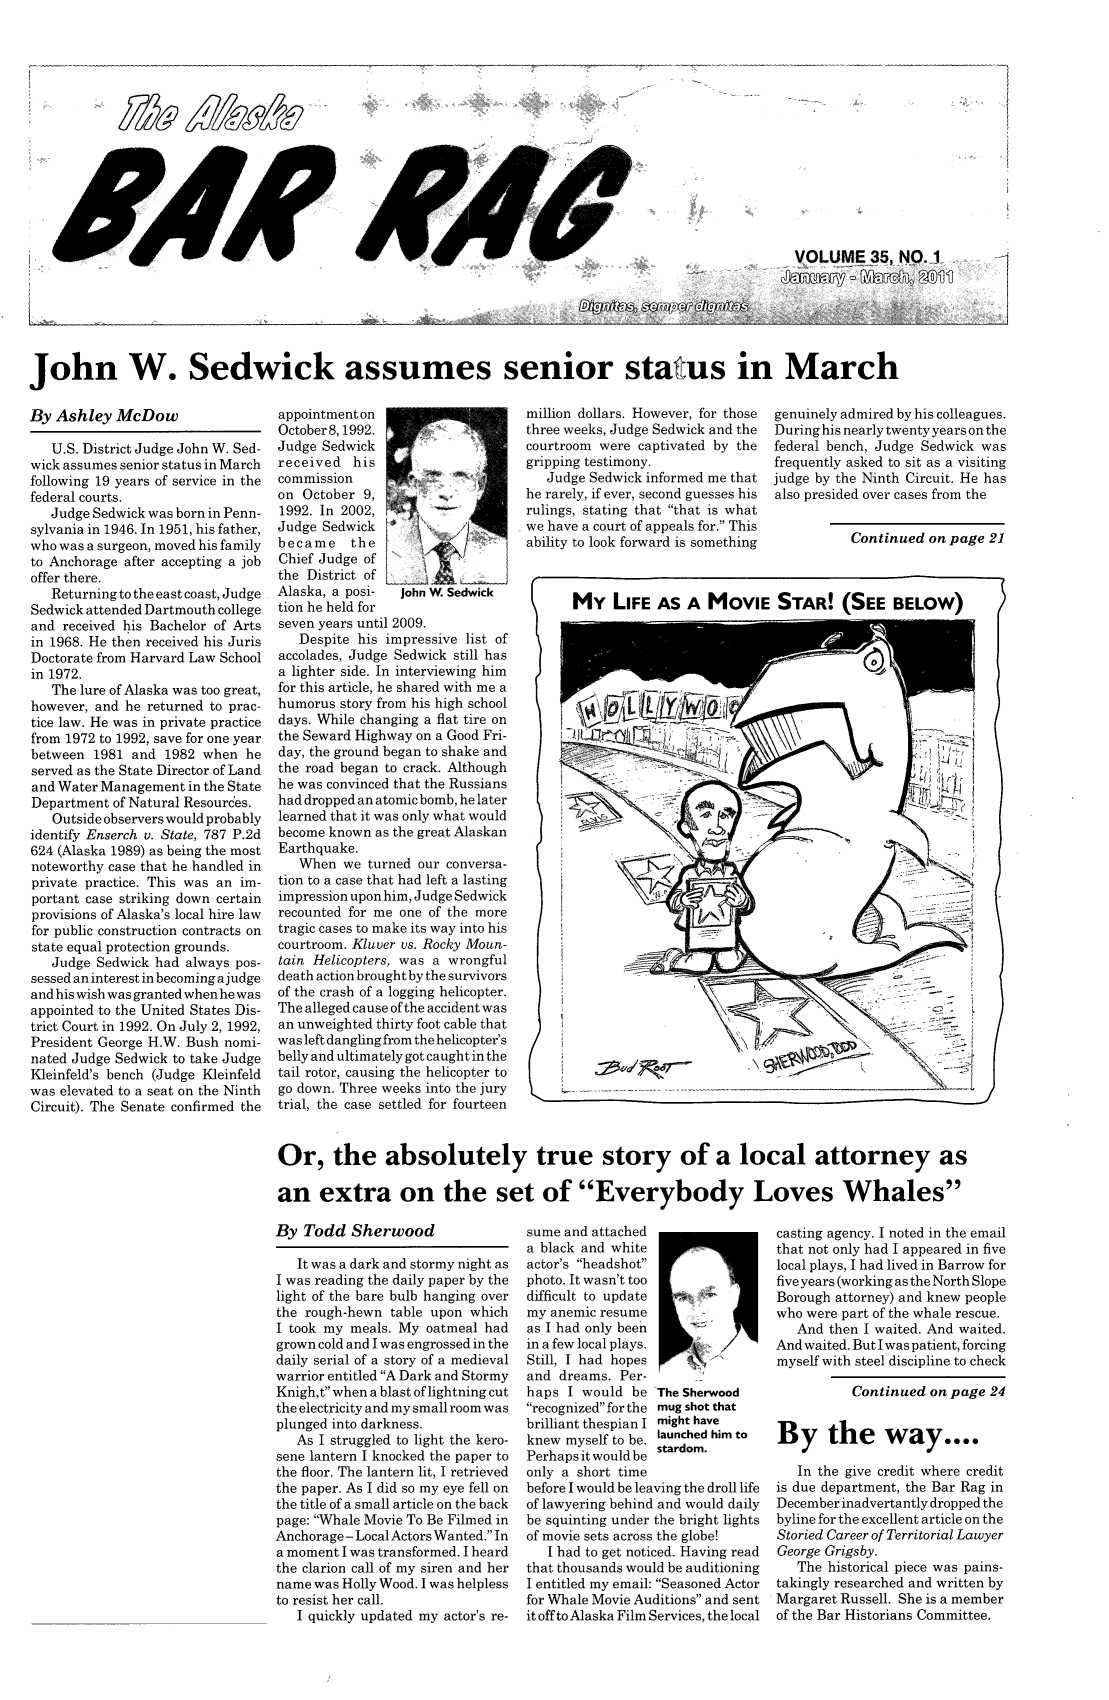 handle is hein.barjournals/askabar0035 and id is 1 raw text is: - -

John W. Sedwick assumes senior status in March

By Ashley McDow
U.S. District Judge John W. Sed-
wick assumes senior status in March
following 19 years of service in the
federal courts.
Judge Sedwick was born in Penn-
sylvania in 1946. In 1951, his father,
who was a surgeon, moved his family
to Anchorage after accepting a job
offer there.
Returning to the east coast, Judge
Sedwick attended Dartmouth college
and received his Bachelor of Arts
in 1968. He then received his Juris
Doctorate from Harvard Law School
in 1972.
The lure of Alaska was too great,
however, and he returned to prac-
tice law. He was in private practice
from 1972 to 1992, save for one year
between 1981 and 1982 when he
served as the State Director of Land
and Water Management in the State
Department of Natural Resources.
Outside observers would probably
identify Enserch v. State, 787 P.2d
624 (Alaska 1989) as being the most
noteworthy case that he handled in
private practice. This was an im-
portant case striking down certain
provisions of Alaska's local hire law
for public construction contracts on
state equal protection grounds.
Judge Sedwick had always pos-
sessed an interest in becoming ajudge
and his wish was granted when he was
appointed to the United States Dis-
trict Court in 1992. On July 2, 1992,
President George H.W. Bush nomi-
nated Judge Sedwick to take Judge
Kleinfeld's bench (Judge Kleinfeld
was elevated to a seat on the Ninth
Circuit). The Senate confirmed the

appointmenton
October8,1992.
Judge Sedwick
received his
commission
on October 9,
1992. In 2002,
Judge Sedwick
became    the
Chief Judge of
the District of
Alaska, a posi-  John W. Sedwick
tion he held for
seven years until 2009.
Despite his impressive list of
accolades, Judge Sedwick still has
a lighter side. In interviewing him
for this article, he shared with me a
humorus story from his high school
days. While changing a flat tire on
the Seward Highway on a Good Fri-
day, the ground began to shake and
the road began to crack. Although
he was convinced that the Russians
had dropped an atomic bomb, he later
learned that it was only what would
become known as the great Alaskan
Earthquake.
When we turned our conversa-
tion to a case that had left a lasting
impression upon him, Judge Sedwick
recounted for me one of the more
tragic cases to make its way into his
courtroom. Kluver vs. Rocky Moun-
tain Helicopters, was a wrongful
death action brought by the survivors
of the crash of a logging helicopter.
The alleged cause of the accident was
an unweighted thirty foot cable that
was left dangling from the helicopter's
belly and ultimately got caught in the
tail rotor, causing the helicopter to
go down. Three weeks into the jury
trial, the case settled for fourteen

million dollars. However, for those
three weeks, Judge Sedwick and the
courtroom were captivated by the
gripping testimony.
Judge Sedwick informed me that
he rarely, if ever, second guesses his
rulings, stating that that is what
we have a court of appeals for. This
ability to look forward is something

genuinely admired by his colleagues.
During his nearly twenty years on the
federal bench, Judge Sedwick was
frequently asked to sit as a visiting
judge by the Ninth Circuit. He has
also presided over cases from the

Continued on page 21

Or, the absolutely true story of a local attorney as
an extra on the set of Everybody Loves Whales

By Todd Sherwood

It was a dark and stormy night as
I was reading the daily paper by the
light of the bare bulb hanging over
the rough-hewn table upon which
I took my meals. My oatmeal had
grown cold and I was engrossed in the
daily serial of a story of a medieval
warrior entitled A Dark and Stormy
Knigh,t when a blast of lightning cut
the electricity and my small room was
plunged into darkness.
As I struggled to light the kero-
sene lantern I knocked the paper to
the floor. The lantern lit, I retrieved
the paper. As I did so my eye fell on
the title of a small article on the back
page: Whale Movie To Be Filmed in
Anchorage - Local Actors Wanted. In
a moment I was transformed. I heard
the clarion call of my siren and her
name was Holly Wood. I was helpless
to resist her call.
I quickly updated my actor's re-

sume and attached
a black and white
actor's headshot
photo. It wasn't too
difficult to update
my anemic resume
as I had only been
in a few local plays.
Still, I had hopes
and dreams. Per-
haps I would be The Sherwood
recognized for the mug shot that
brilliant thespian I might have
knew myself to be. launched him to
Perhaps it would be stardom.
only a short time
before I would be leaving the droll life
of lawyering behind and would daily
be squinting under the bright lights
of movie sets across the globe!
I had to get noticed. Having read
that thousands would be auditioning
I entitled my email: Seasoned Actor
for Whale Movie Auditions and sent
it off to Alaska Film Services, the local

casting agency. I noted in the email
that not only had I appeared in five
local plays, I had lived in Barrow for
five years (working as the North Slope
Borough attorney) and knew people
who were part of the whale rescue.
And then I waited. And waited.
And waited. But I was patient, forcing
myself with steel discipline to check
Continued on page 24
By the way....
In the give credit where credit
is due department, the Bar Rag in
December inadvertantly dropped the
byline for the excellent article on the
Storied Career of Territorial Lawyer
George Grigsby.
The historical piece was pains-
takingly researched and written by
Margaret Russell. She is a member
of the Bar Historians Committee.

FJ4),

oegge


